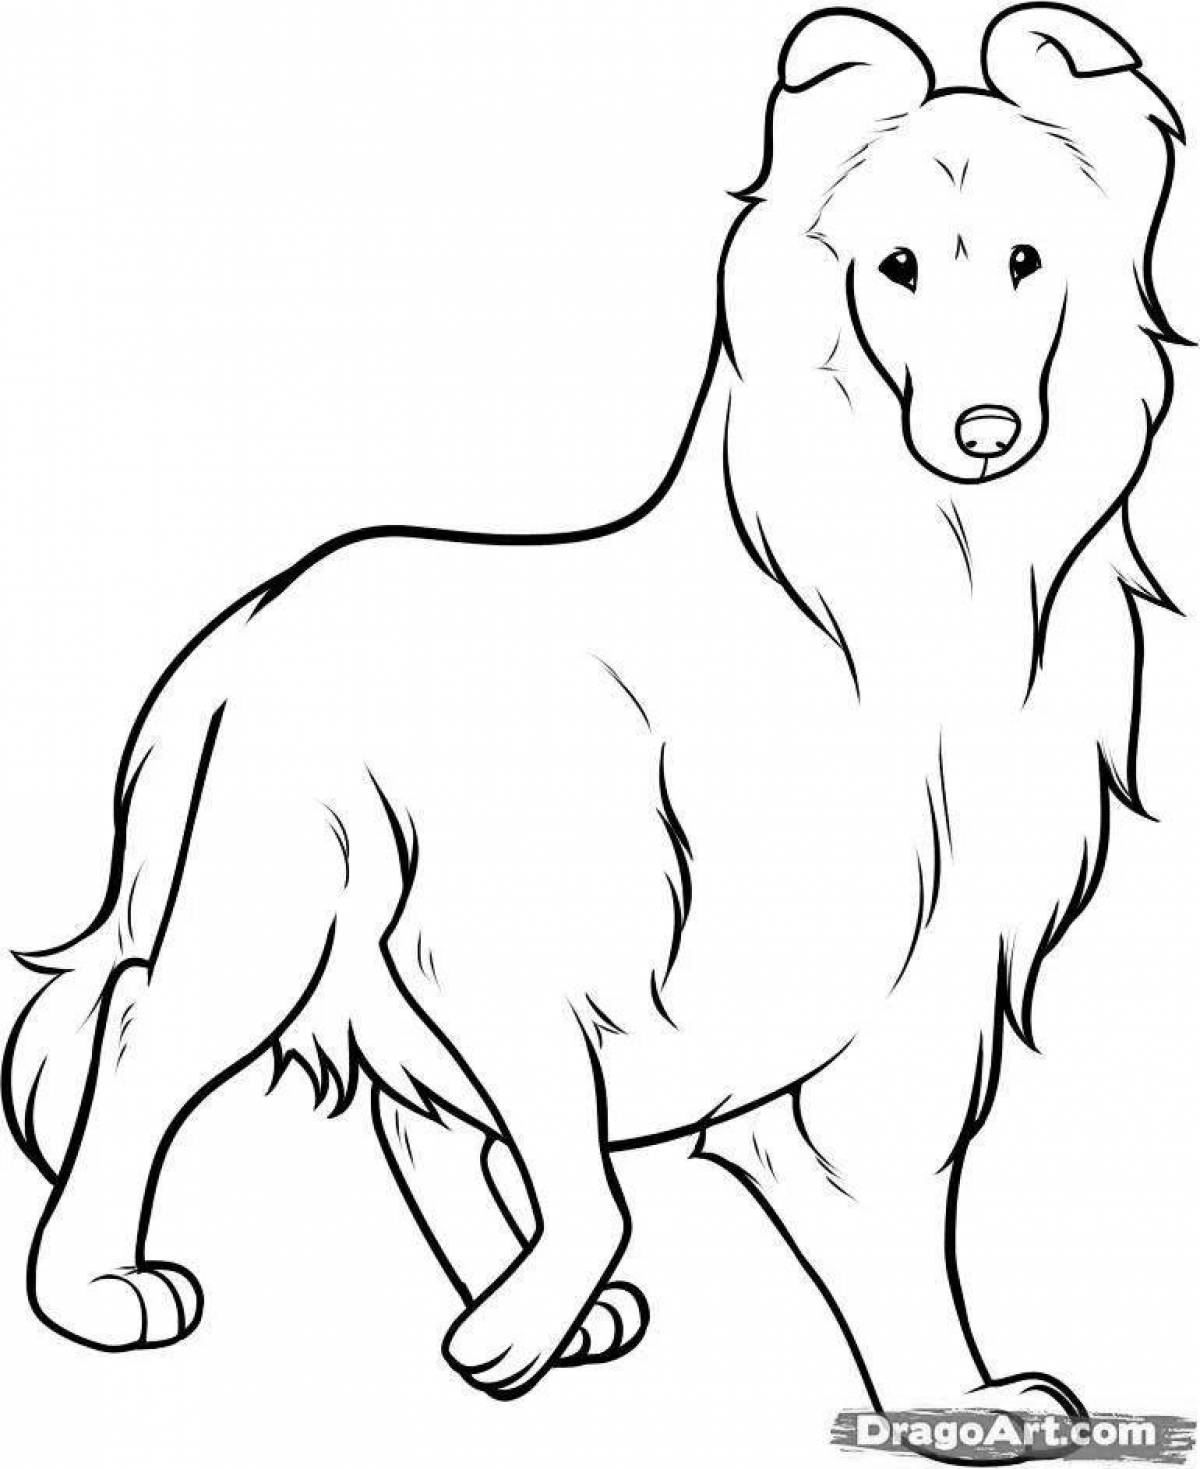 Amazing collie coloring book